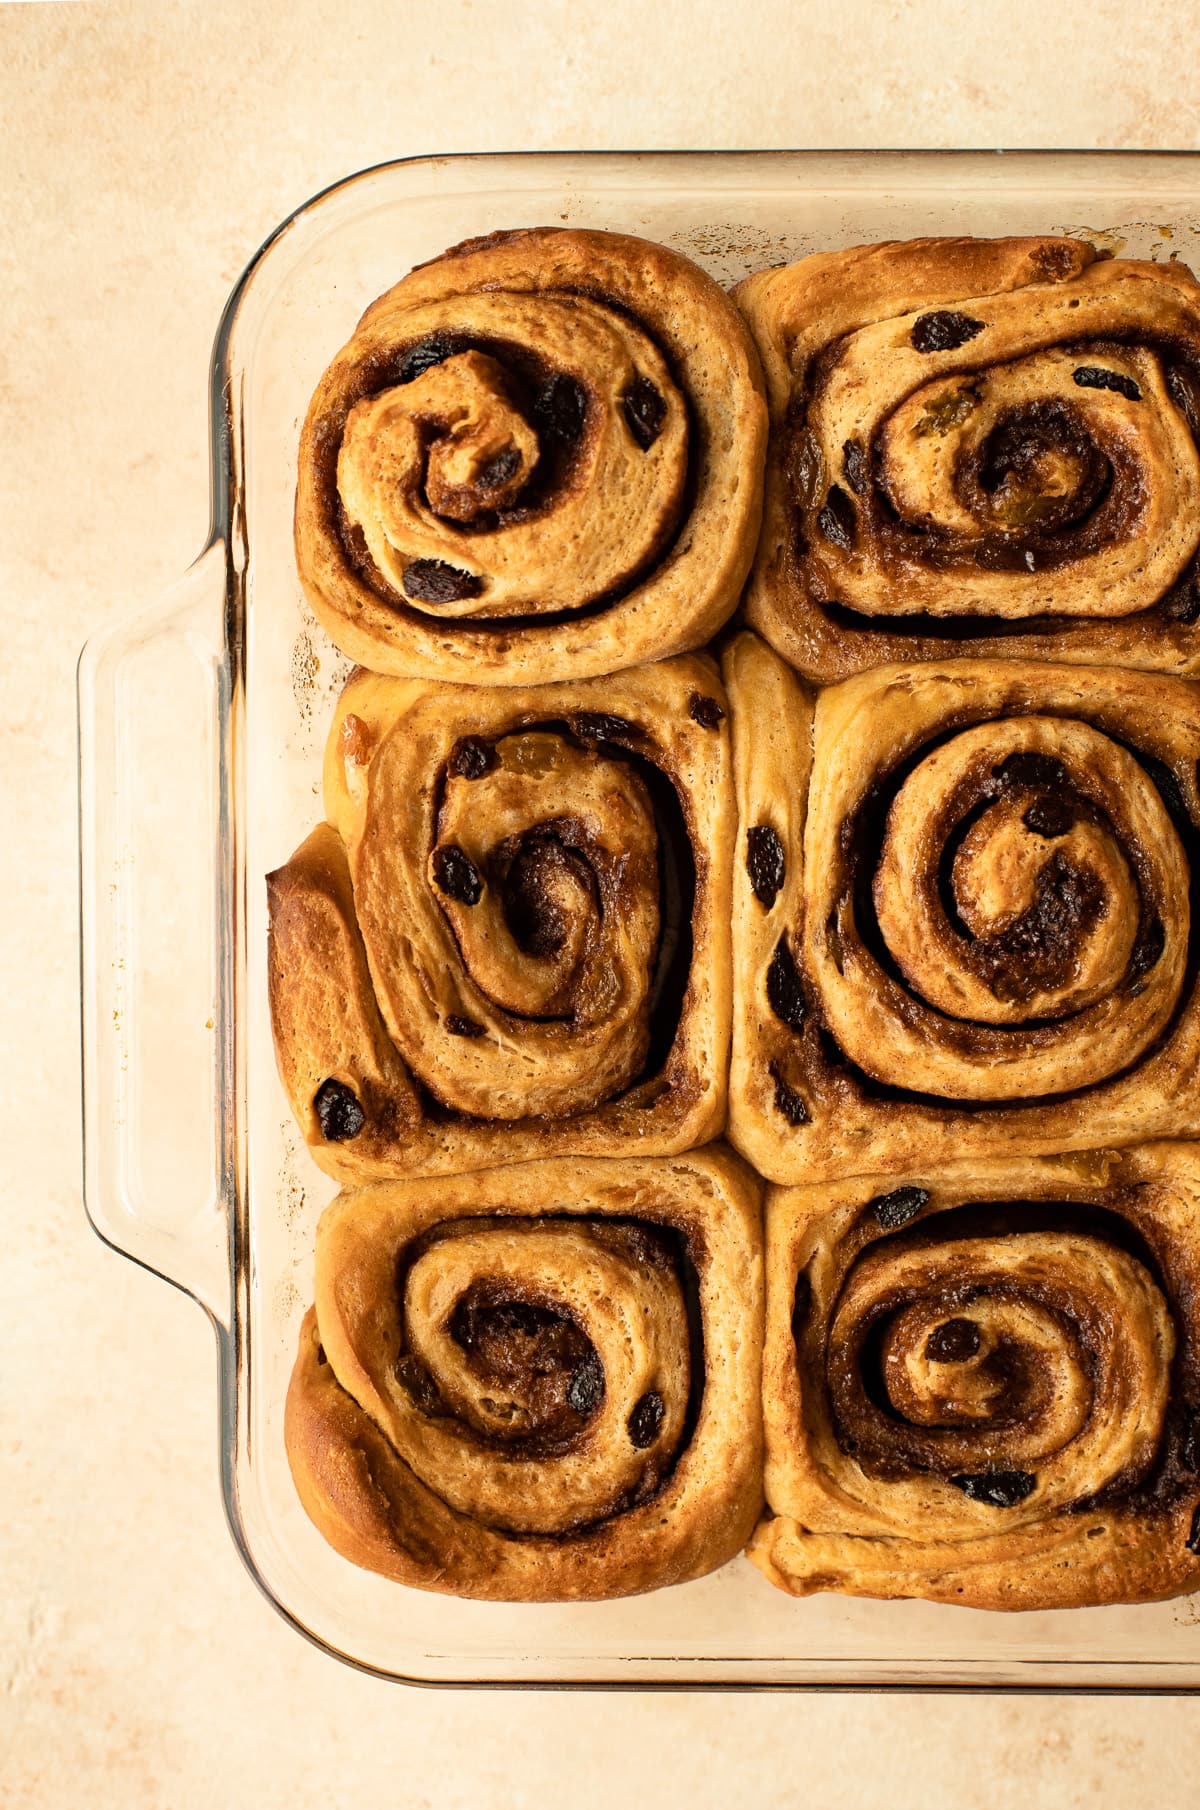 Overhead view of homemade cinnamon rolls in a glass baking dish.